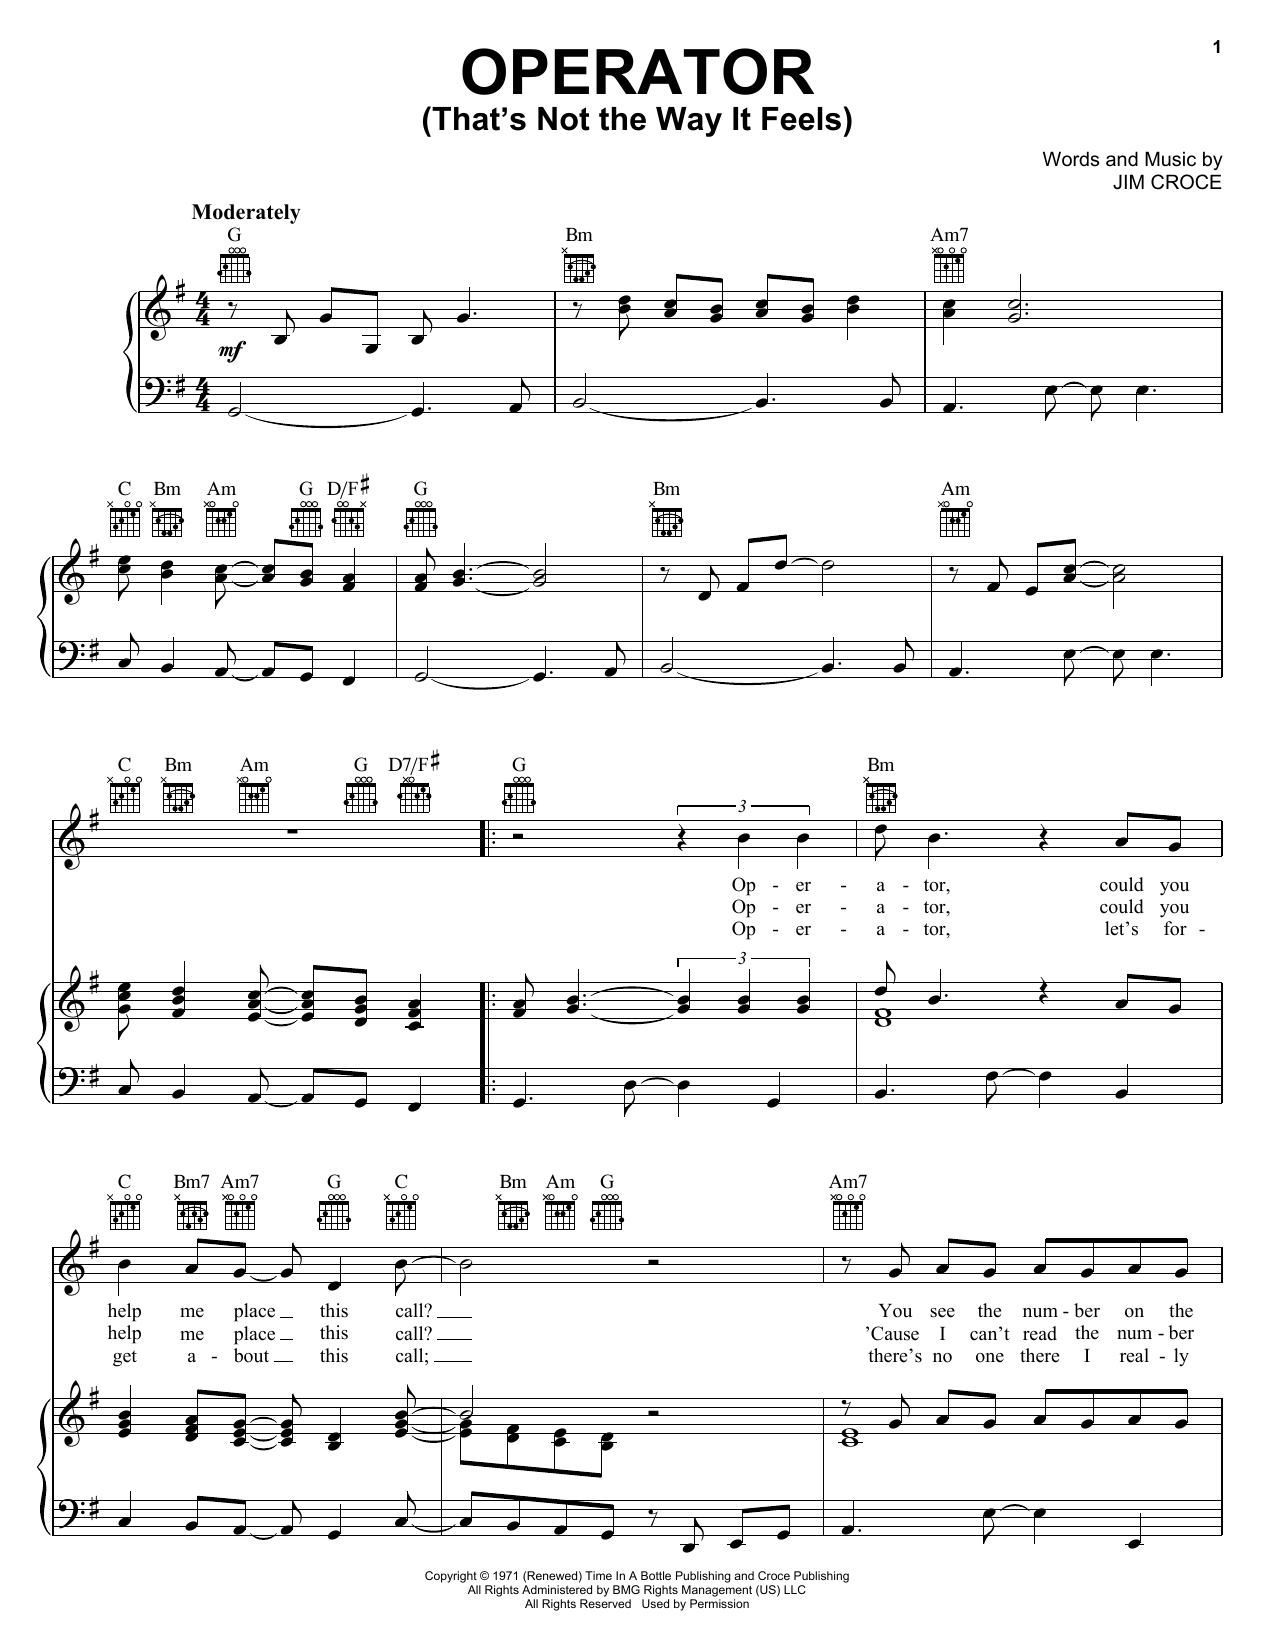 Jim Croce Operator (That's Not The Way It Feels) sheet music notes and chords. Download Printable PDF.